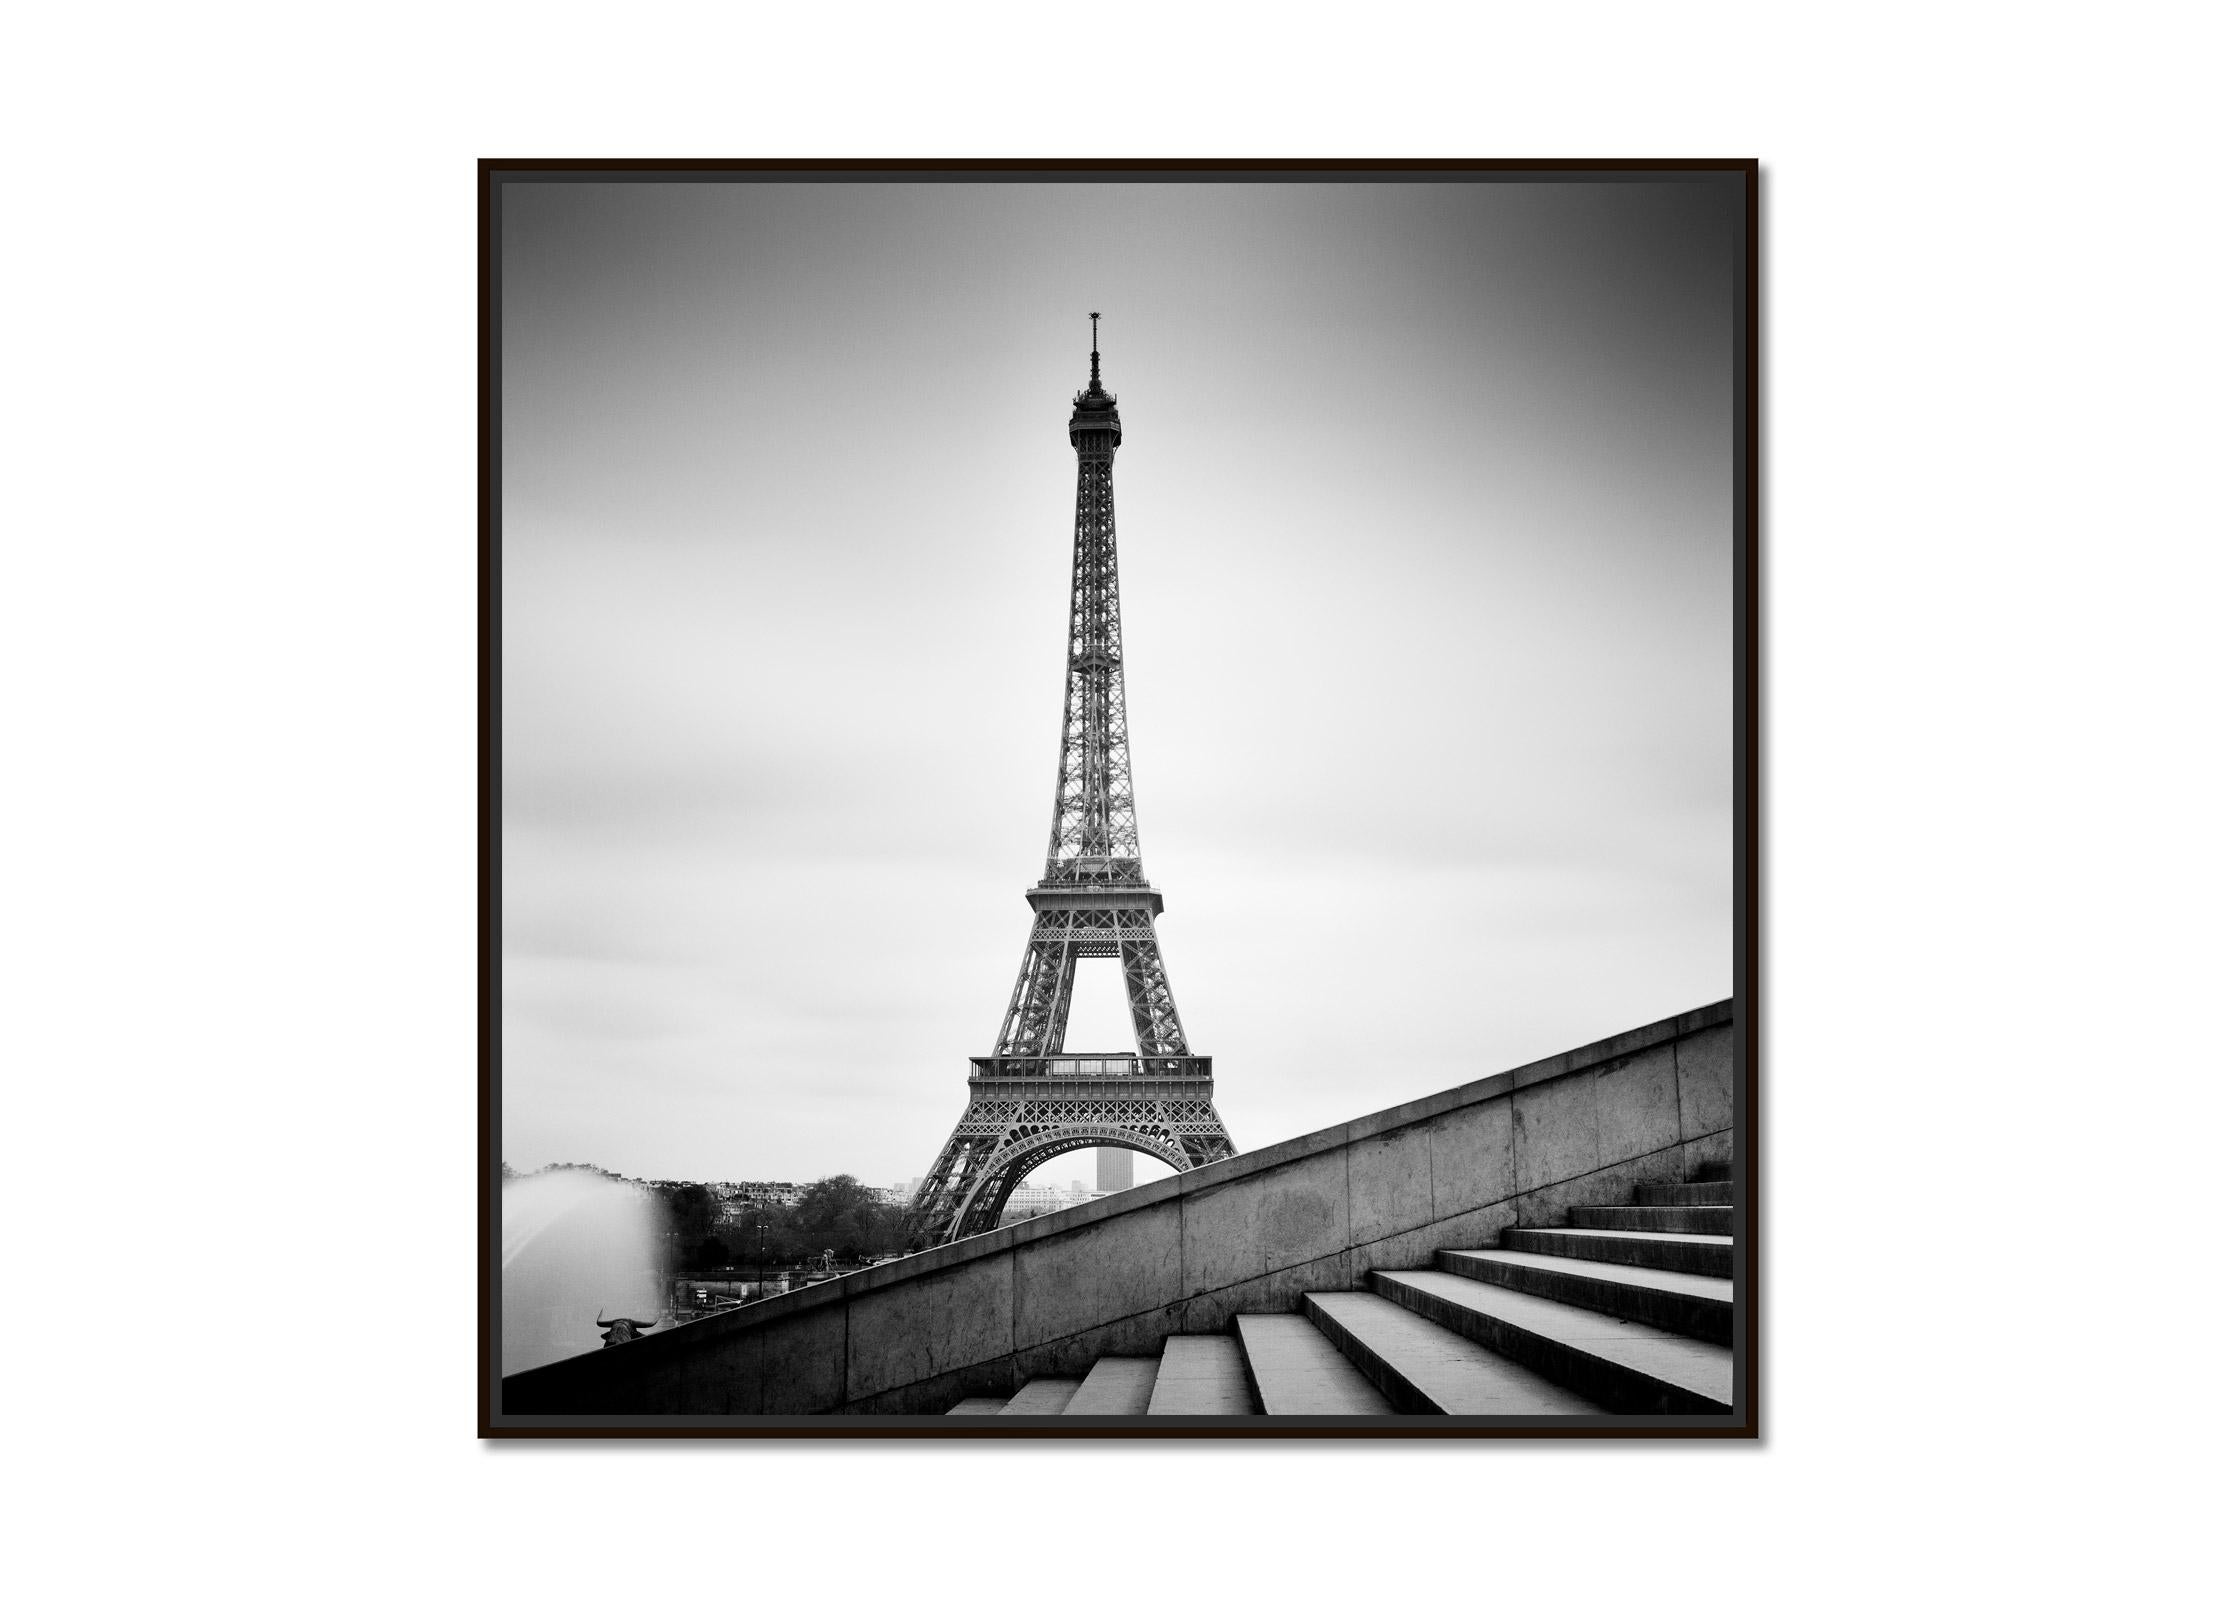 Eiffel Tower, Stairs at the Trocadero, Paris, black and white cityscape print - Photograph by Gerald Berghammer